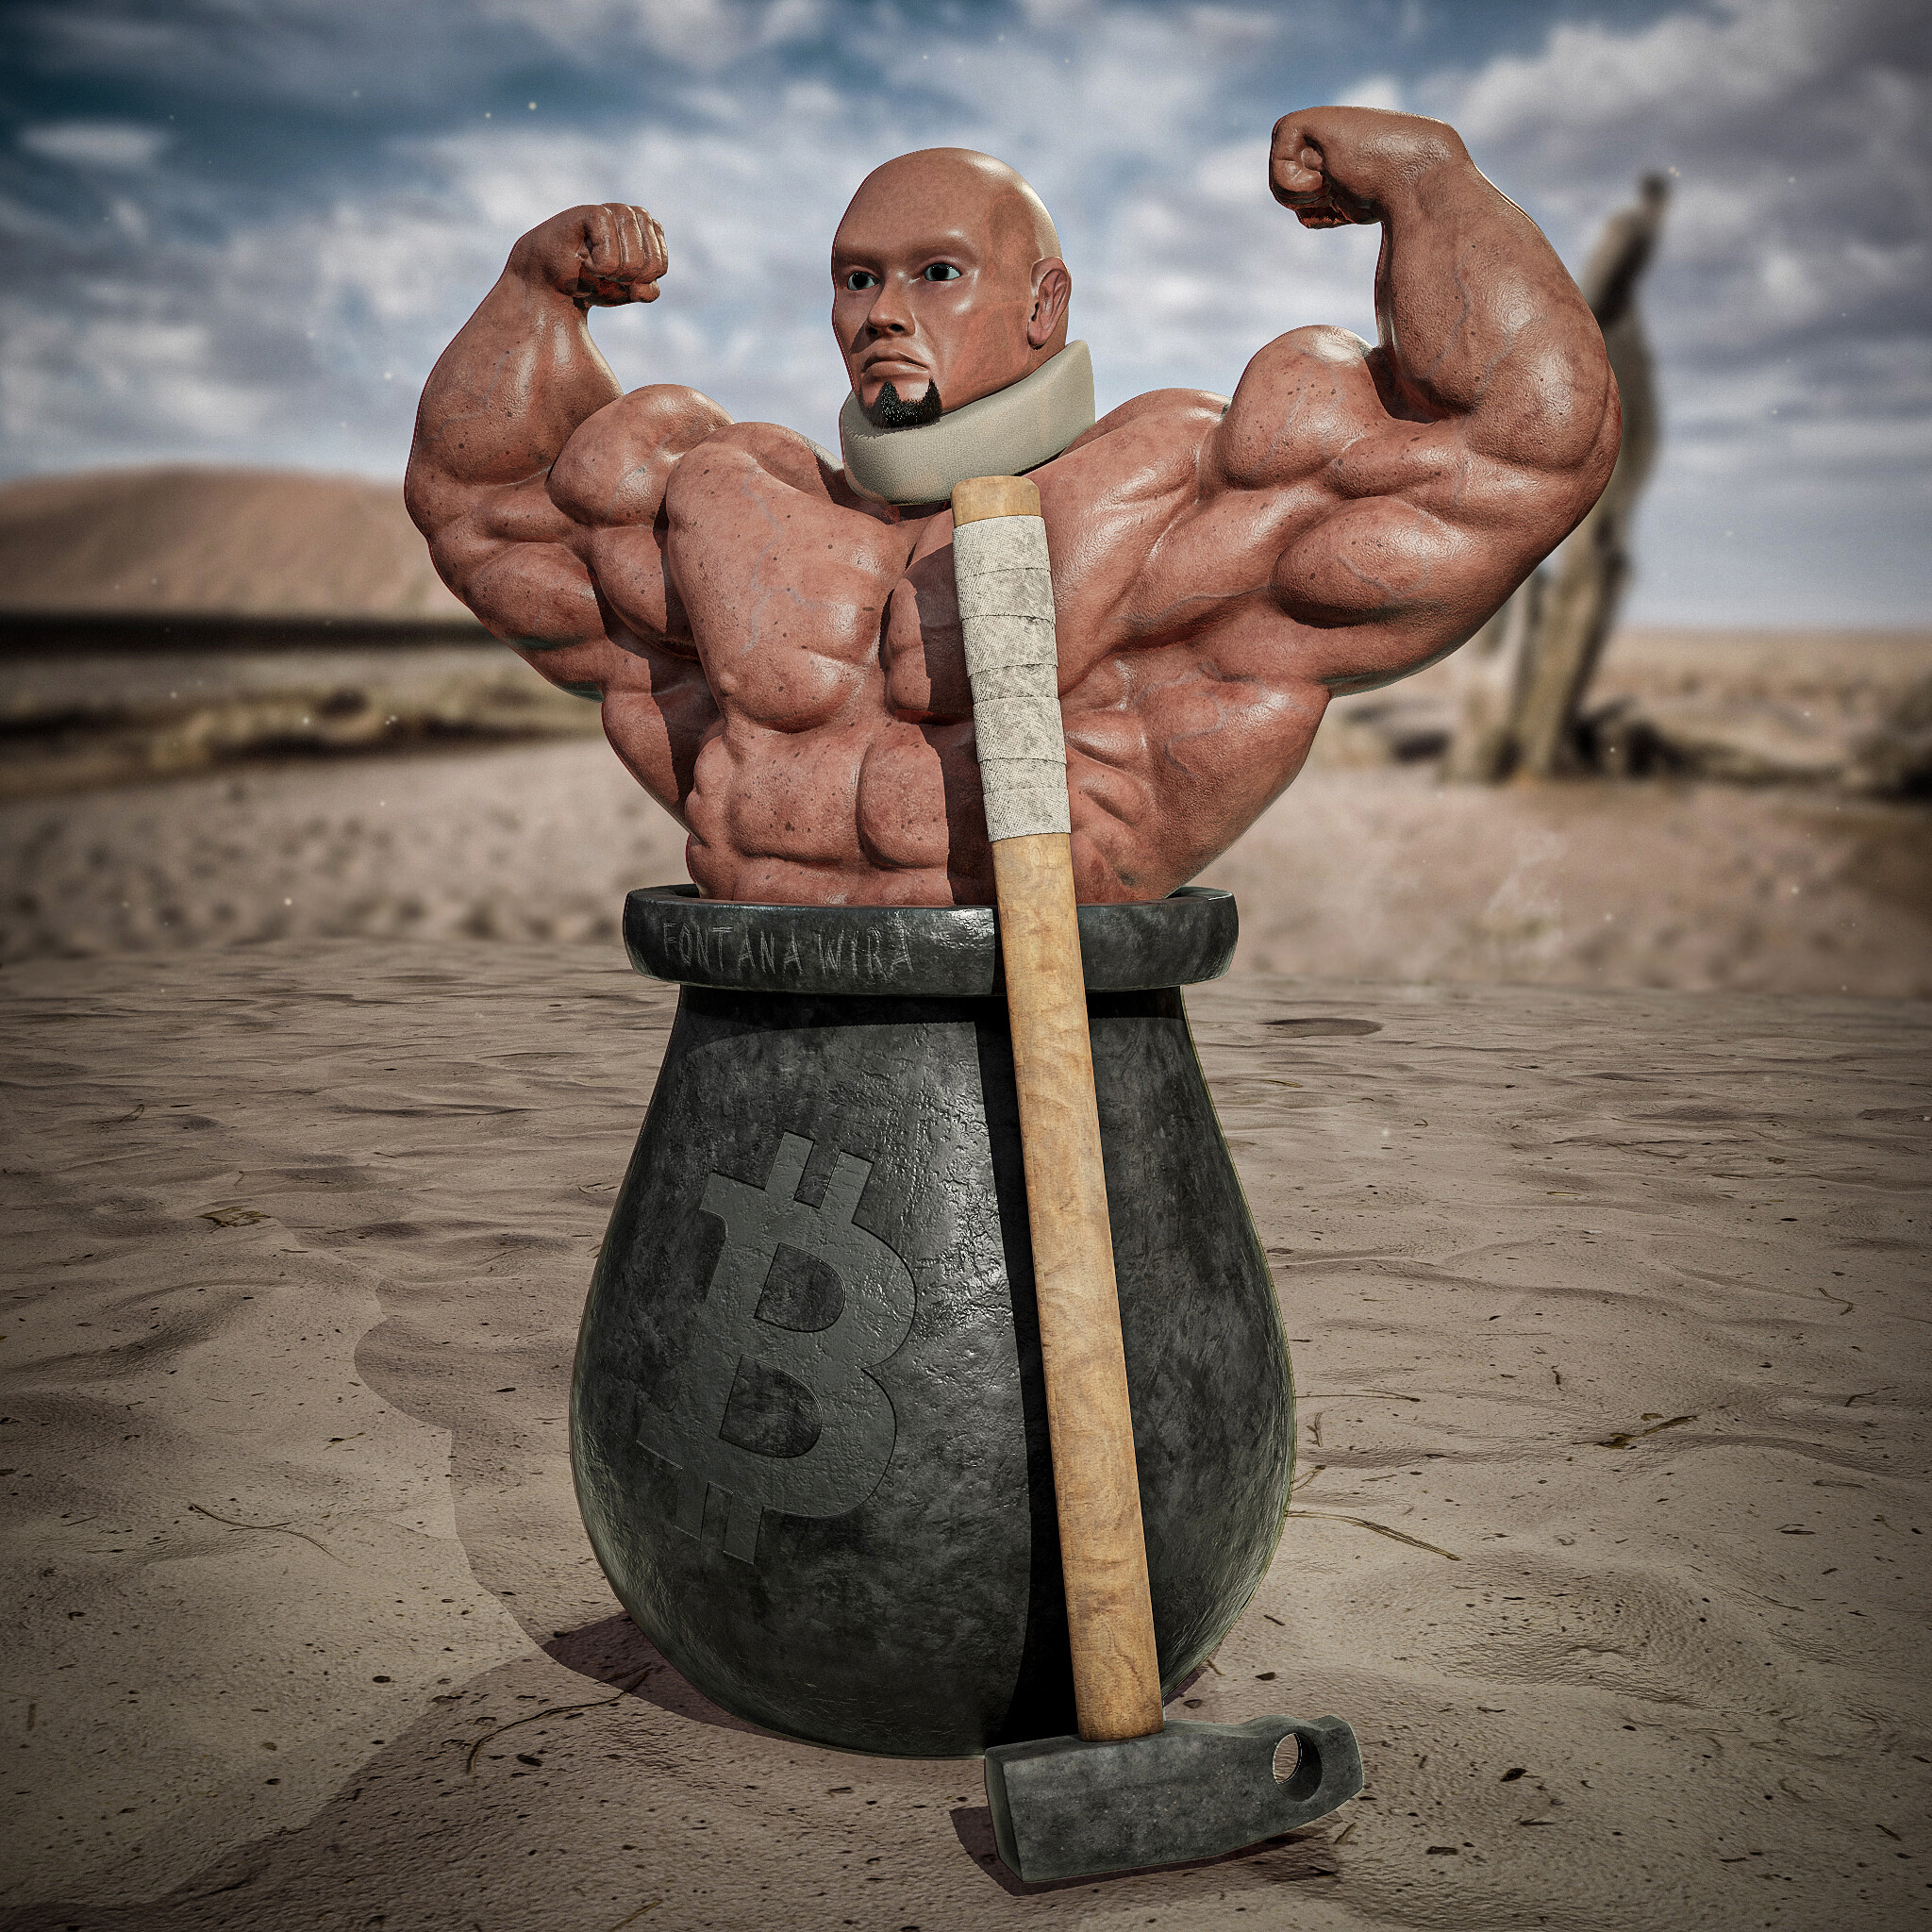 Diogenes - Getting Over It by Bennett Foddy - Finished Projects - Blender  Artists Community